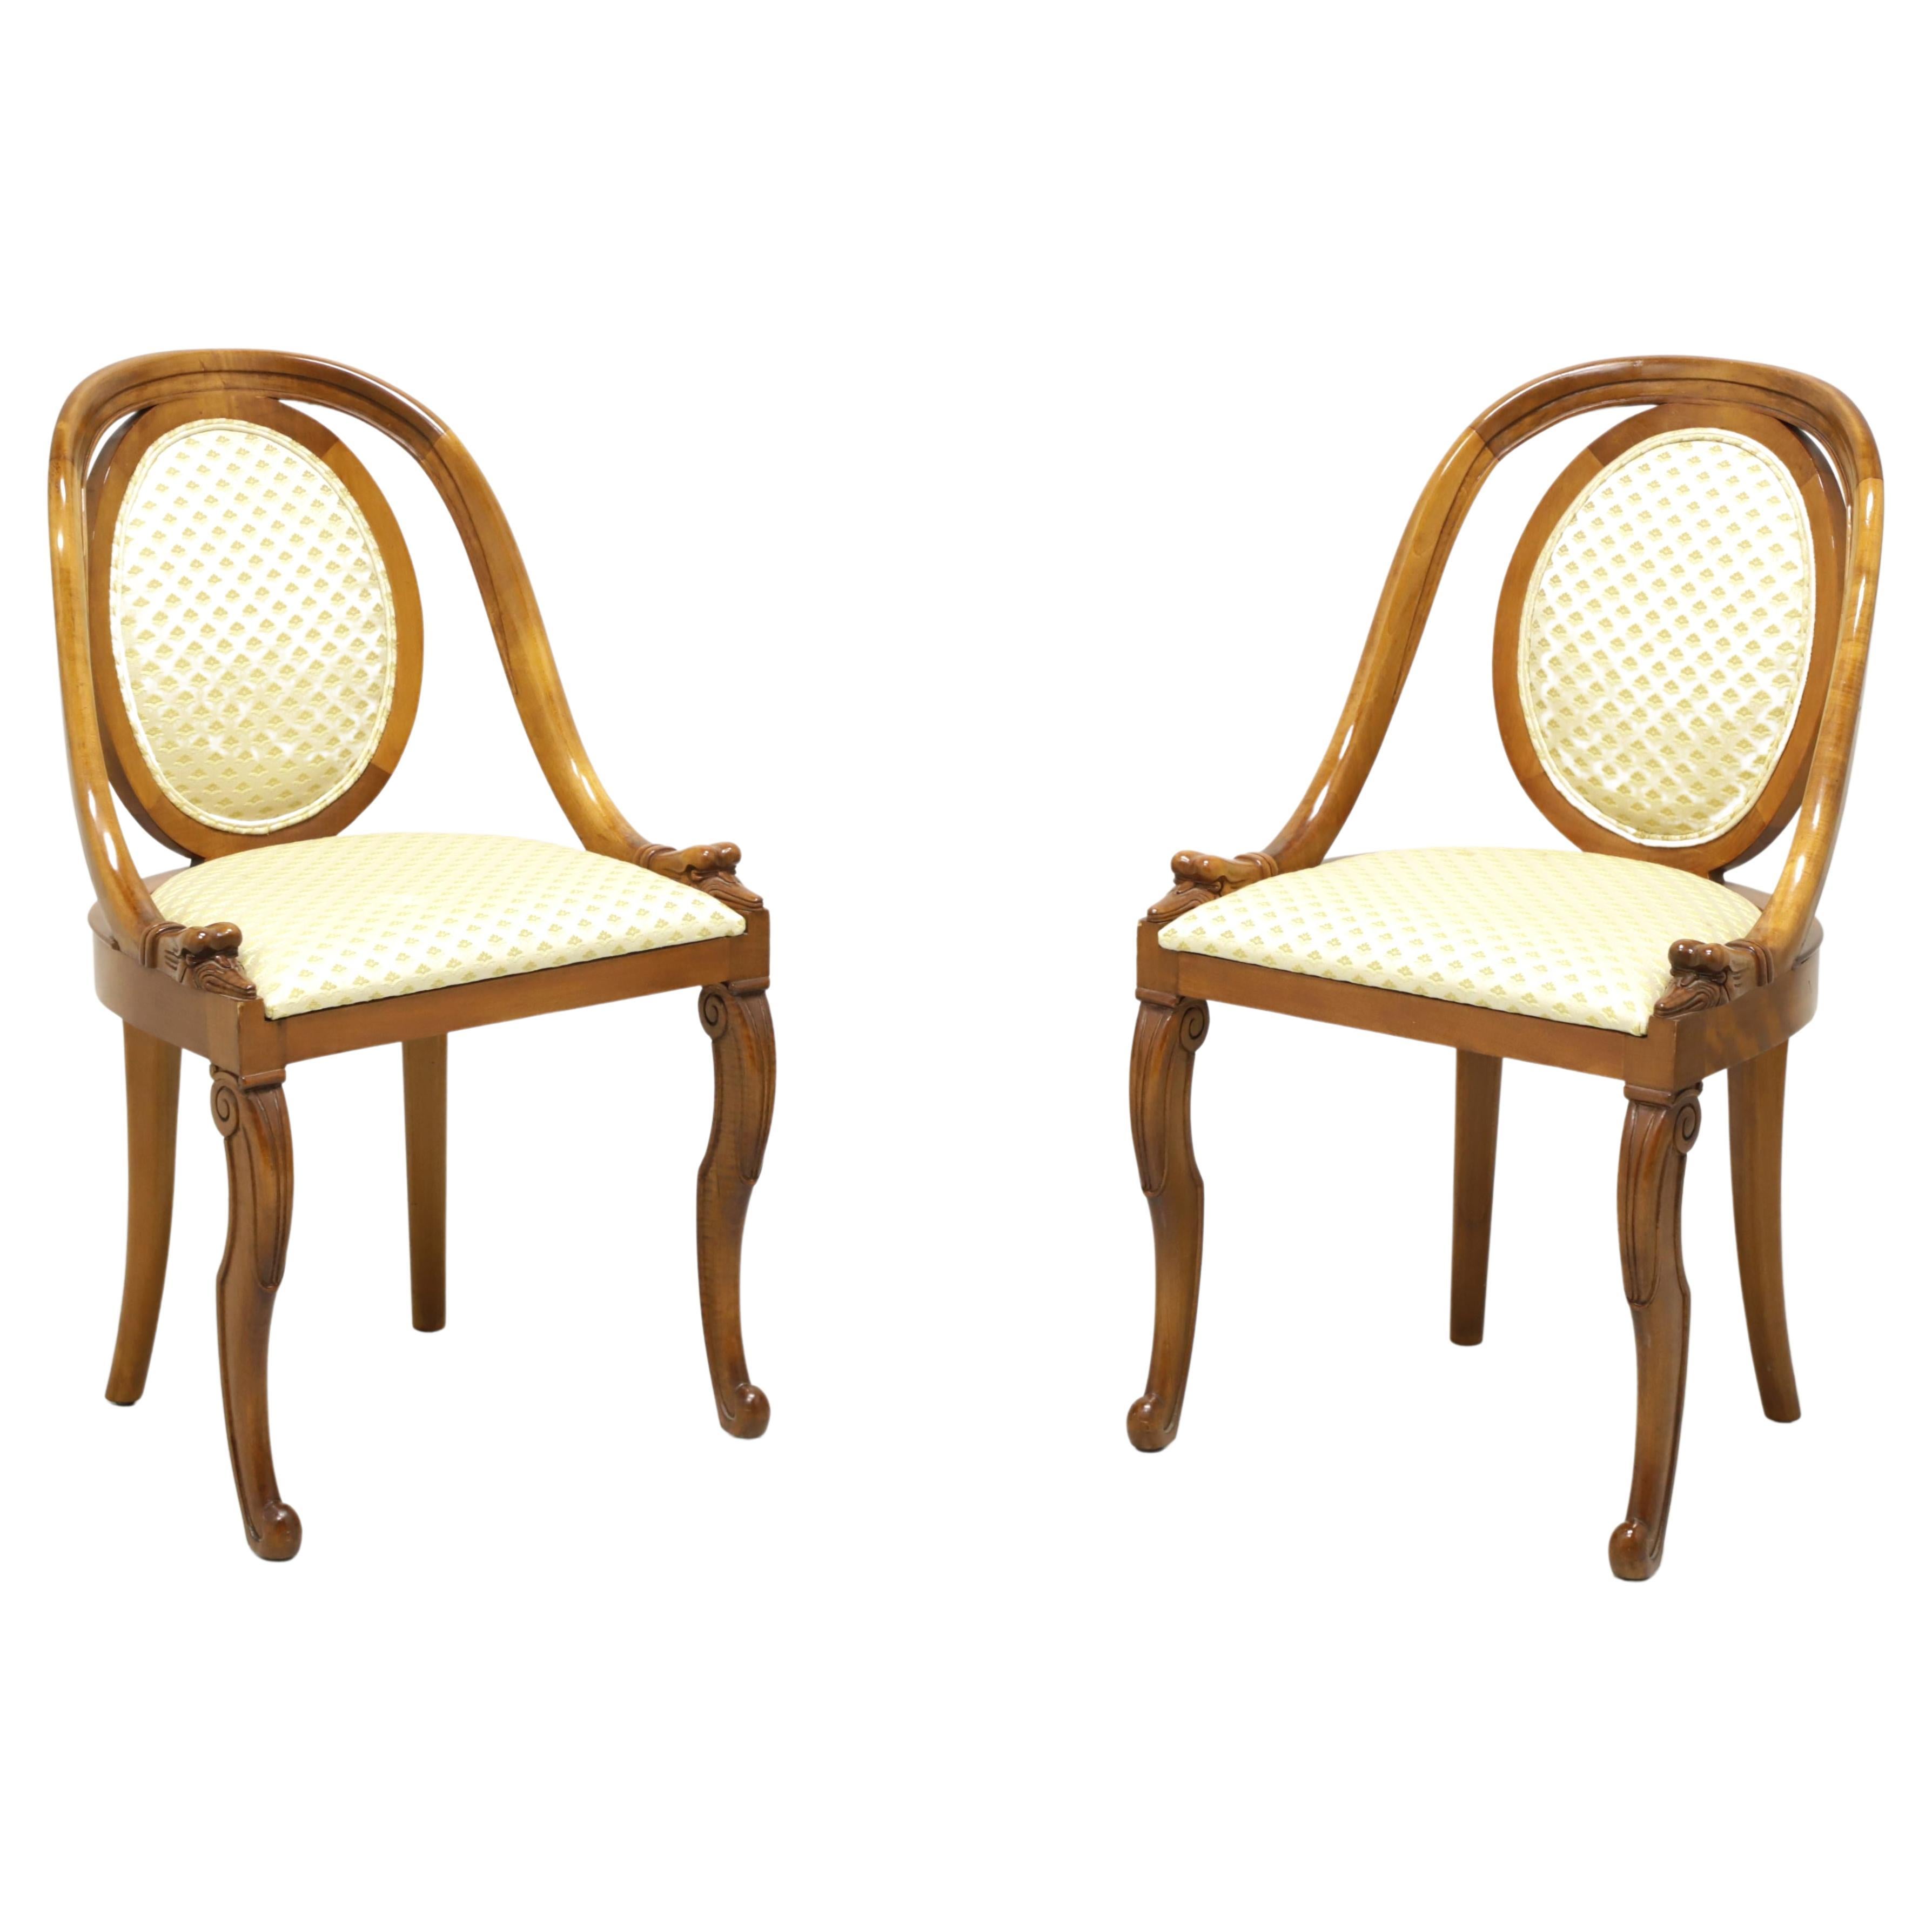 1920's French Art Deco Goosehead Dining Chairs - Pair A